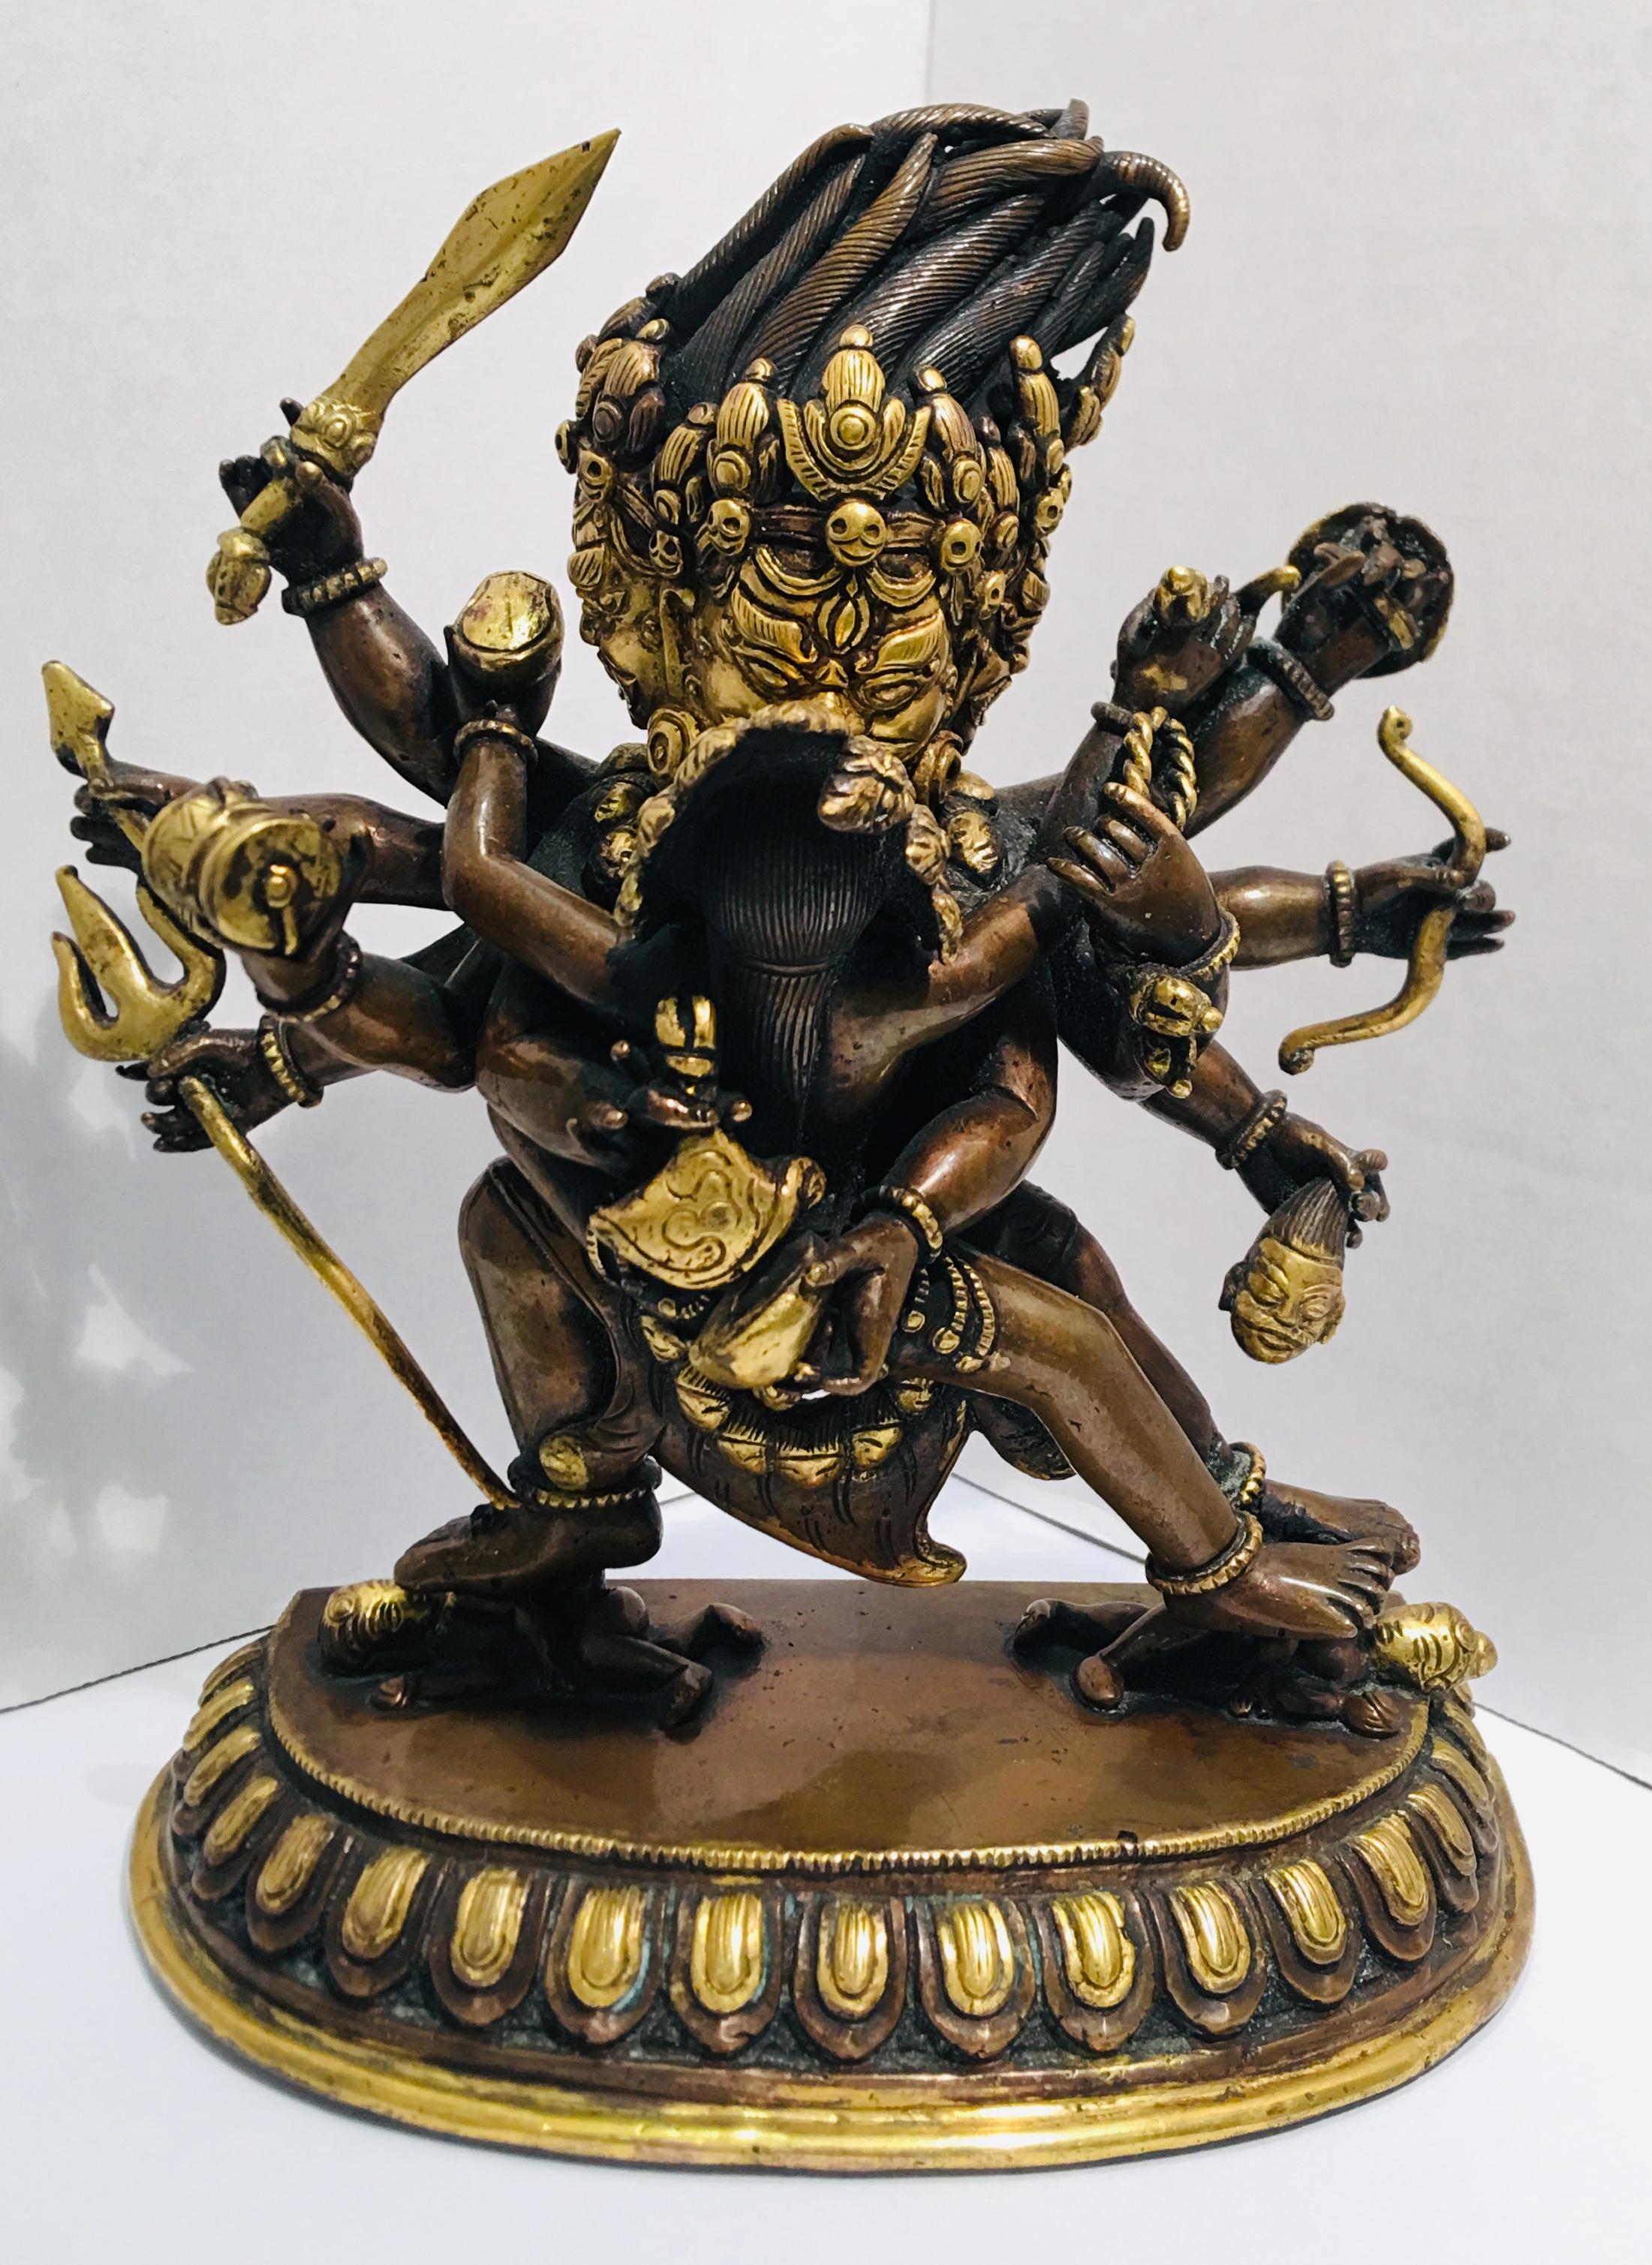 A Sino-Tibetan bronze Yamantaka (Sanskrit: Vajrabhairav) with 3 buffalo-head faces and Medusa-like dreadlocks, and 10 arms, holding weapons and objects in every hand as he furiously embraces his consort, Vajravetali, who wears the 5 pointed crown,